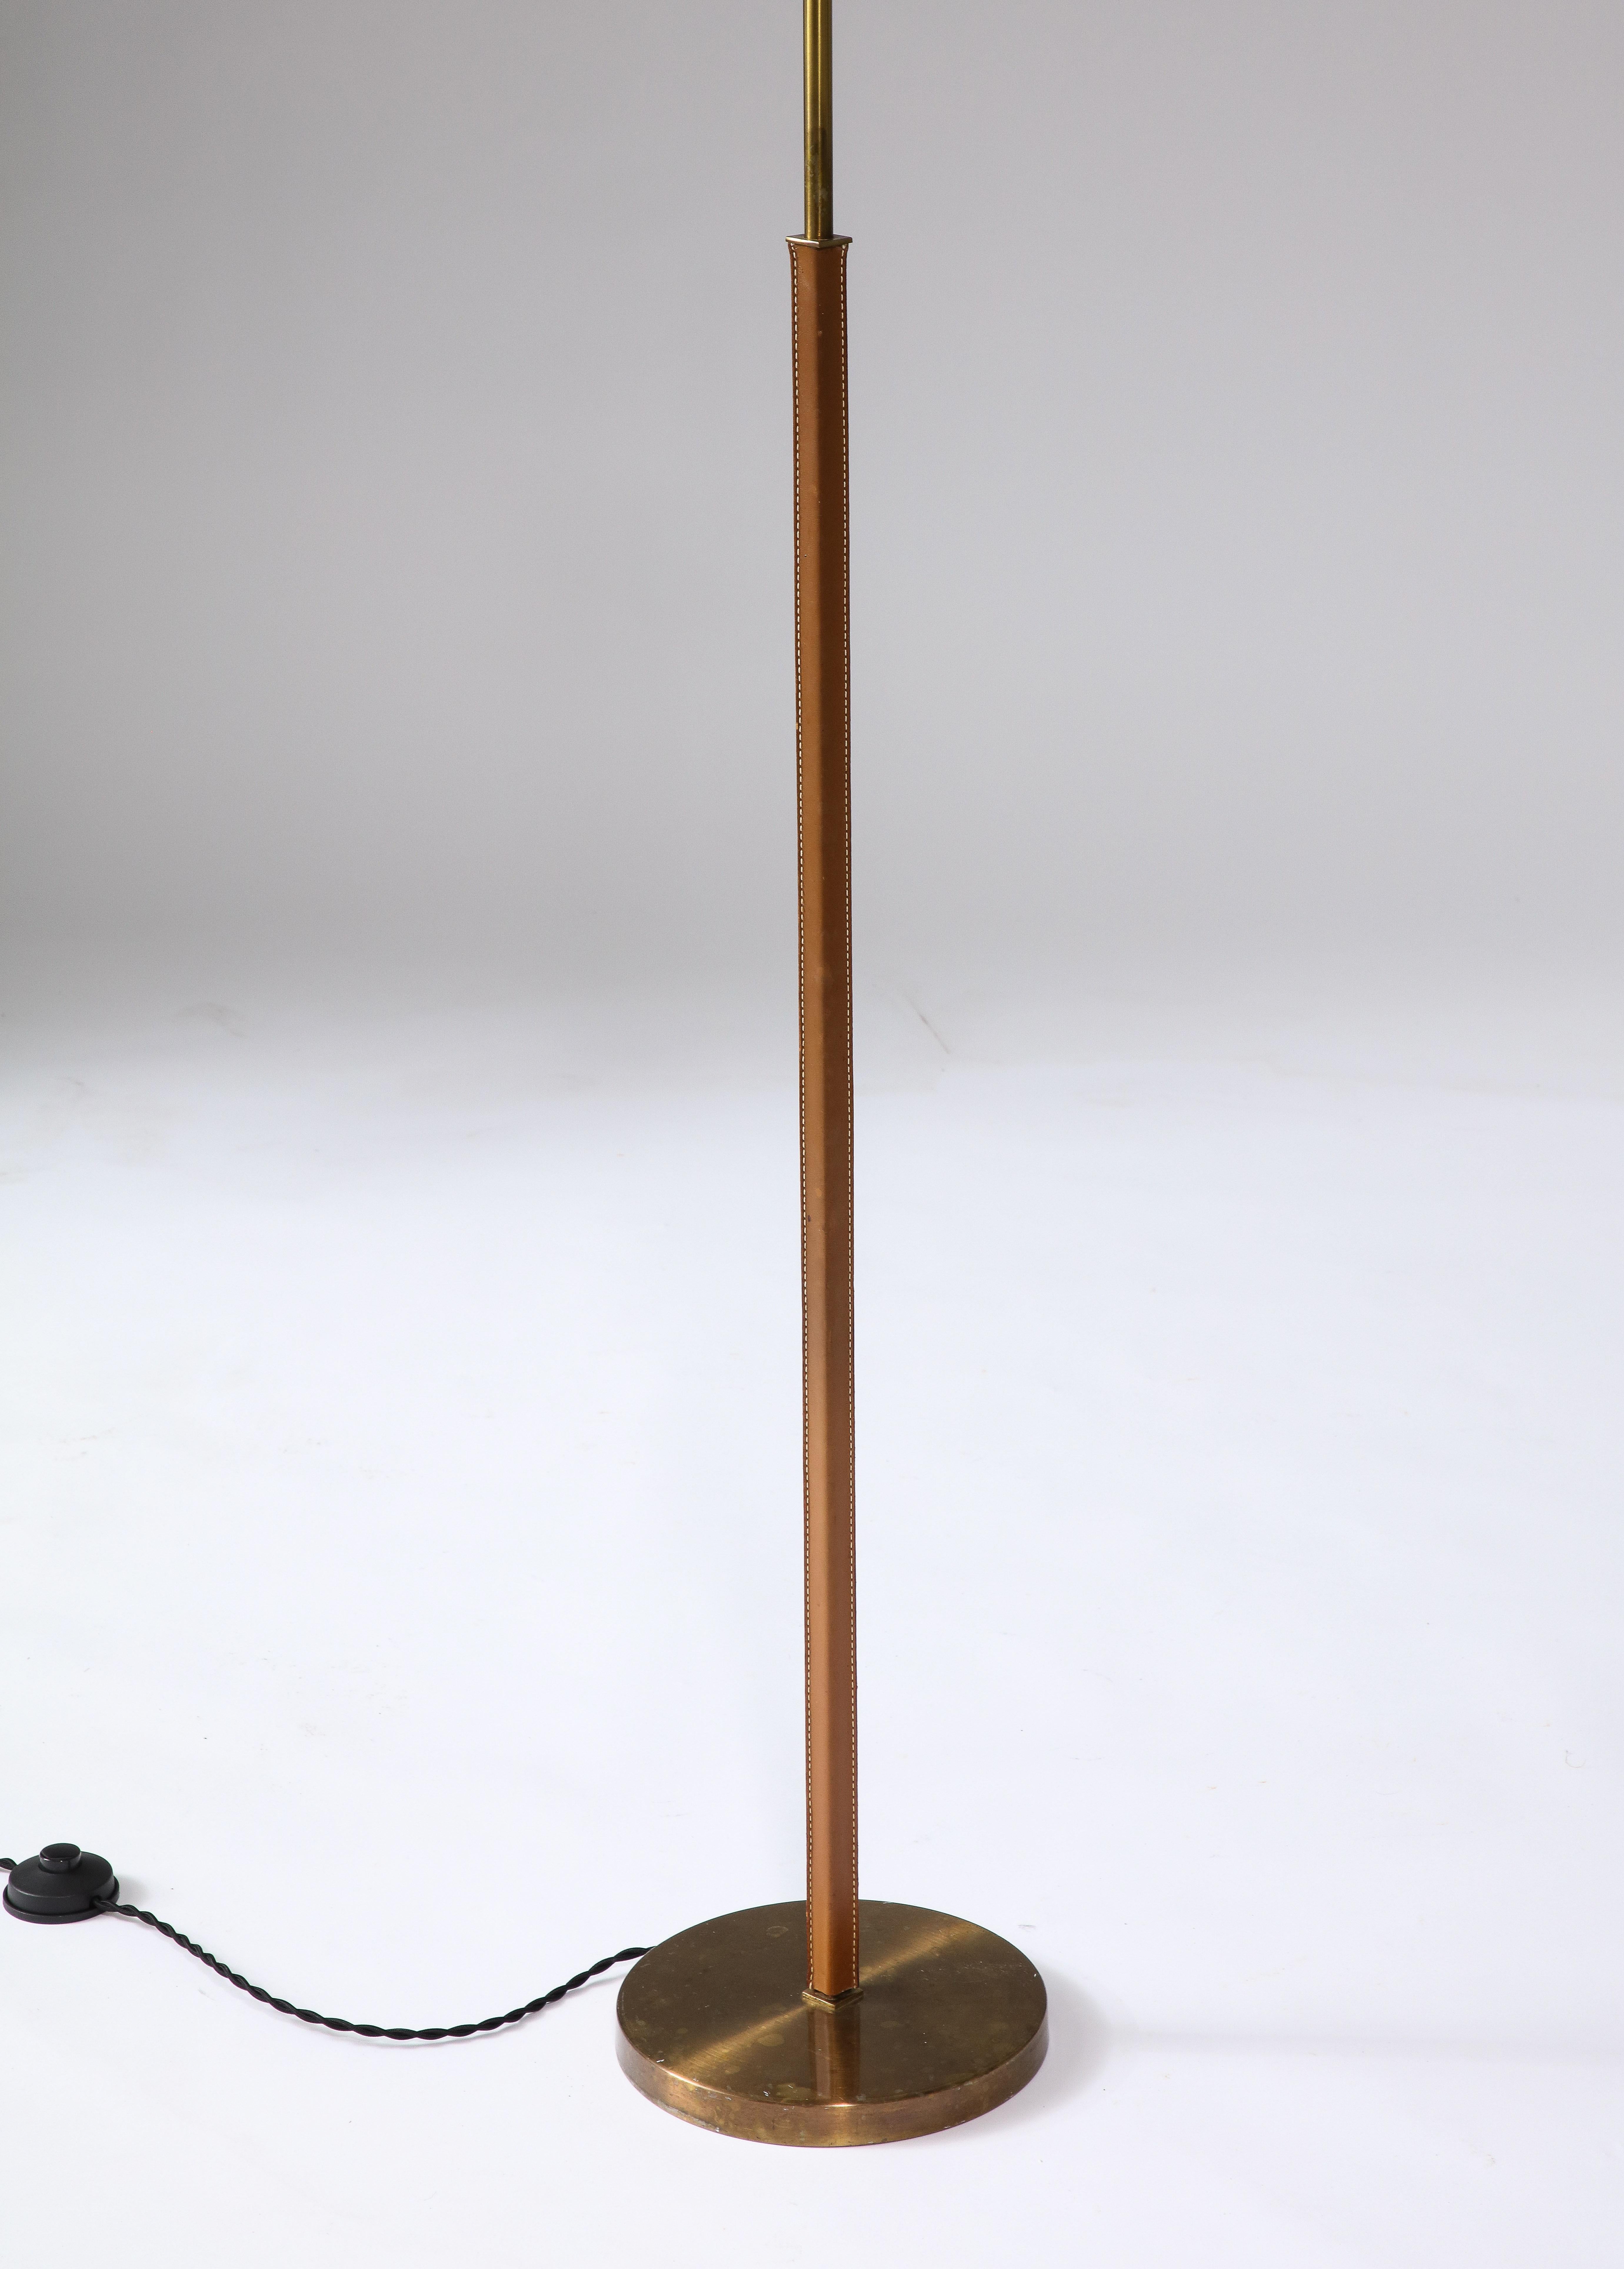 Brass and Leather Floor Lamp by Falkenbergs Belysning, Sweden, c. 1950 For Sale 3